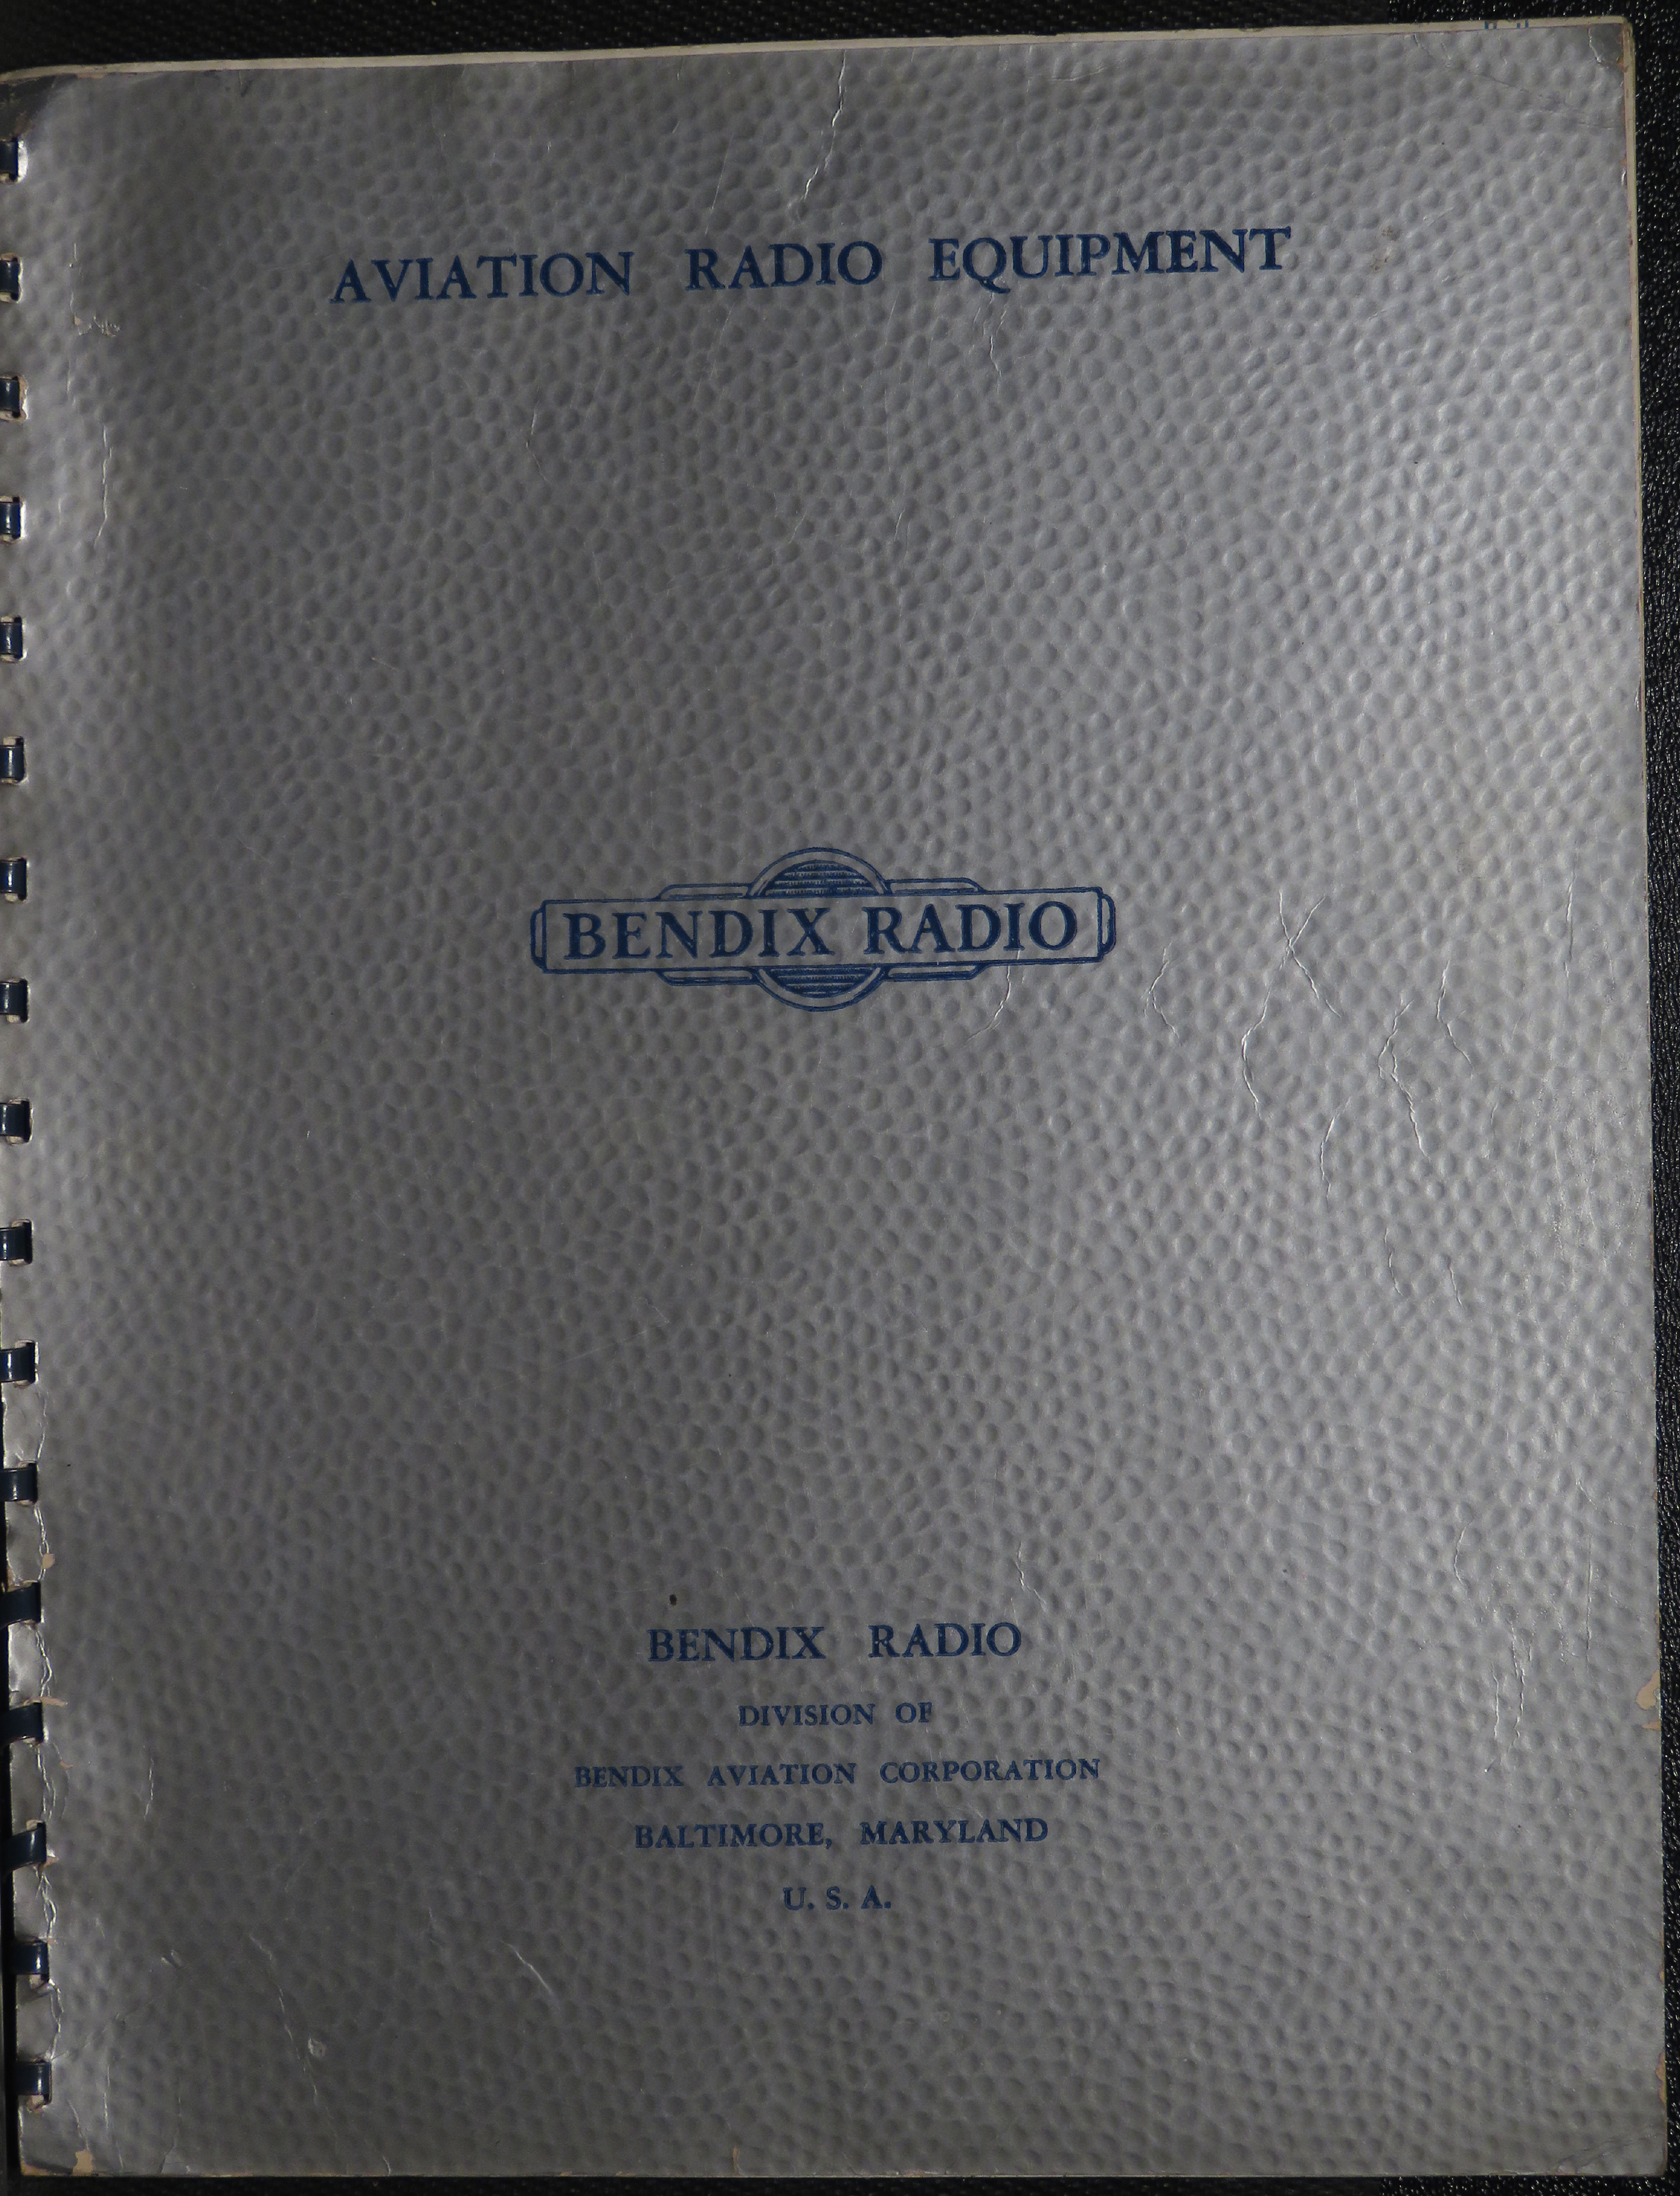 Sample page 1 from AirCorps Library document: Bendix Radio - Aviation Radio Equipment